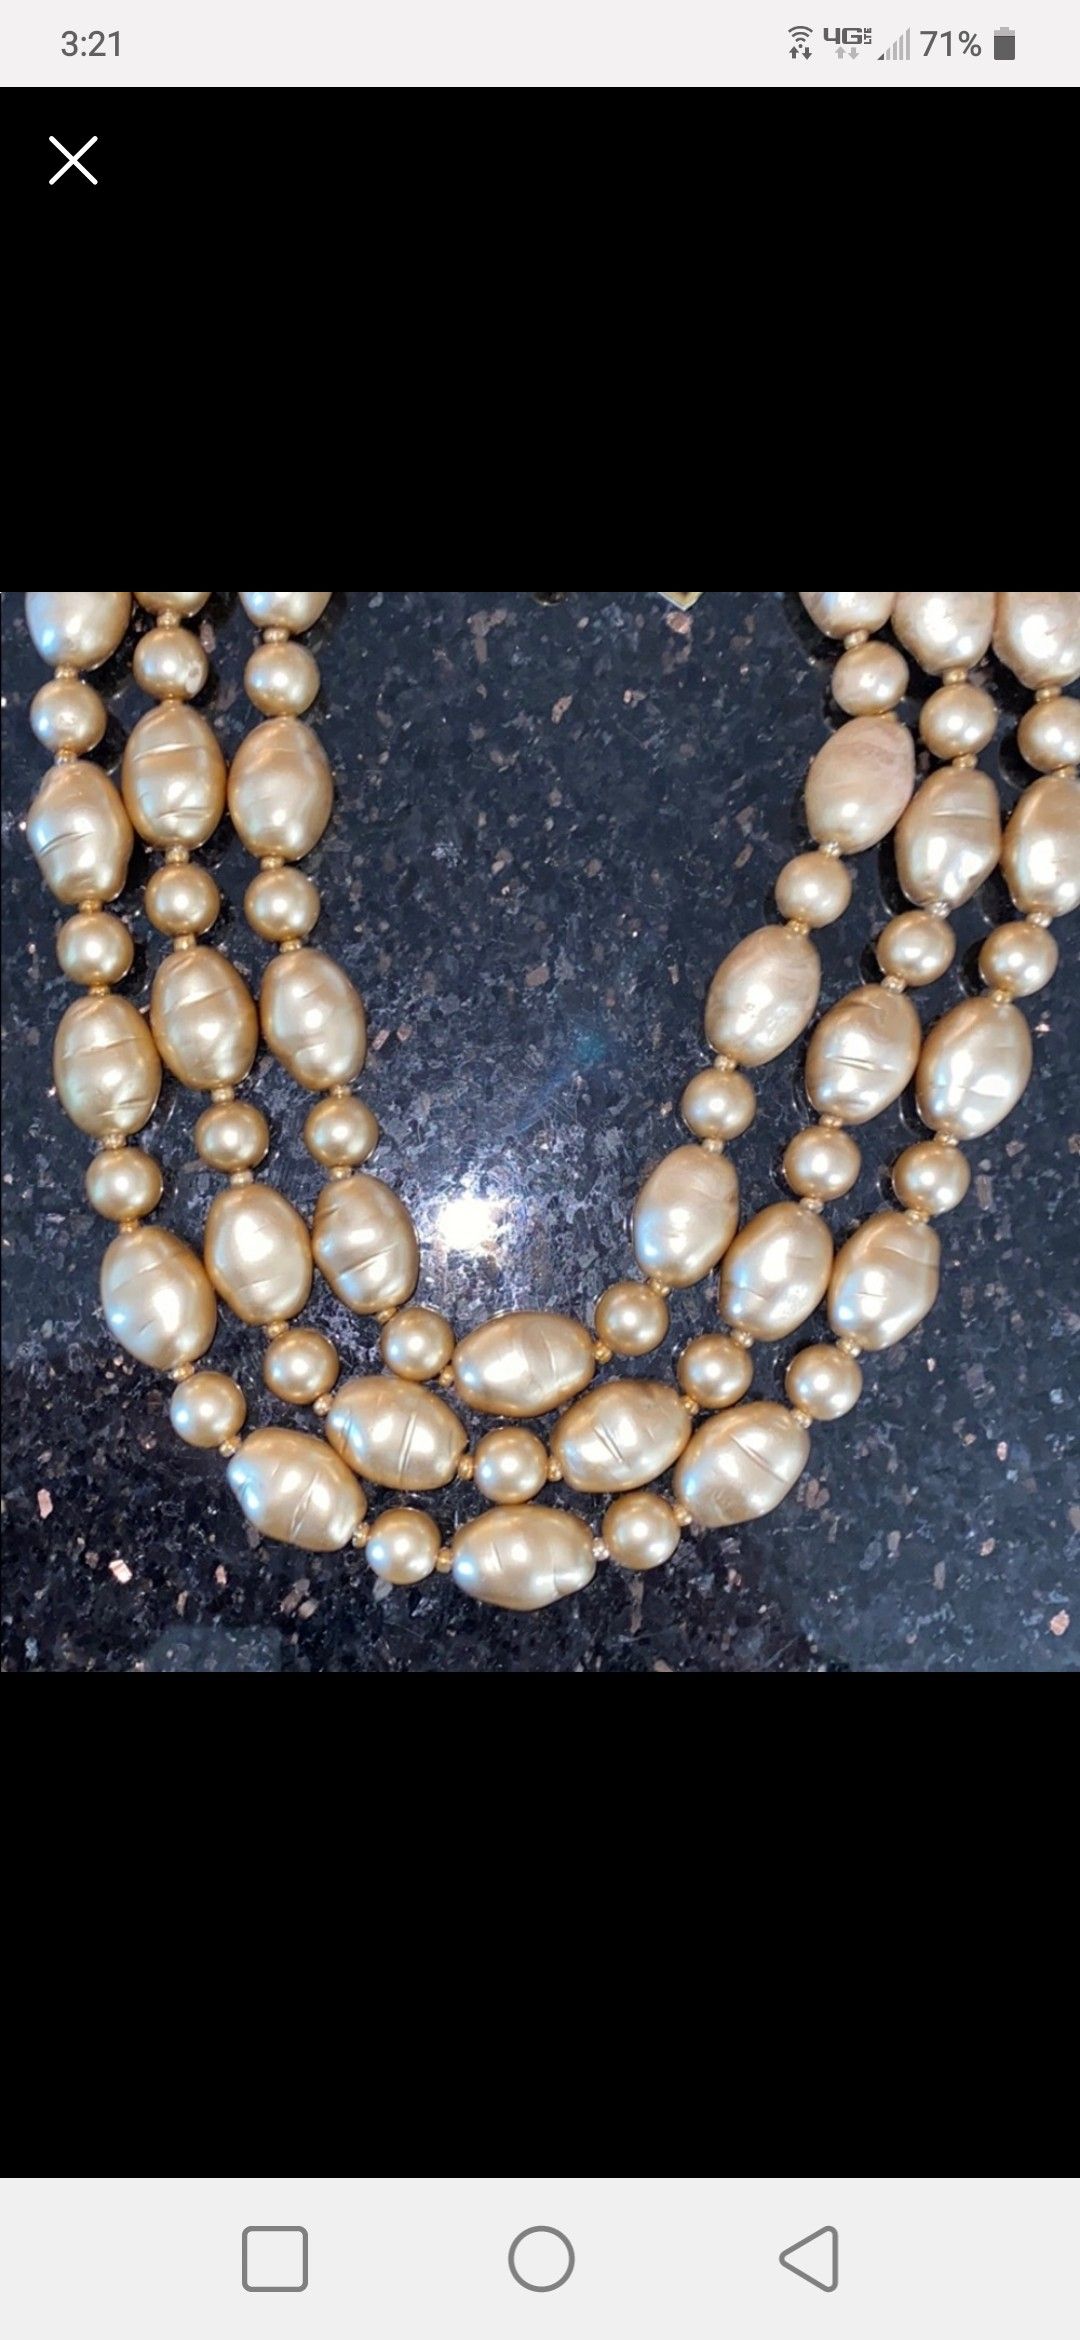 Joan Rivers 16inch with 3 inch extension simulated glass pearls 8 mms. Was $299